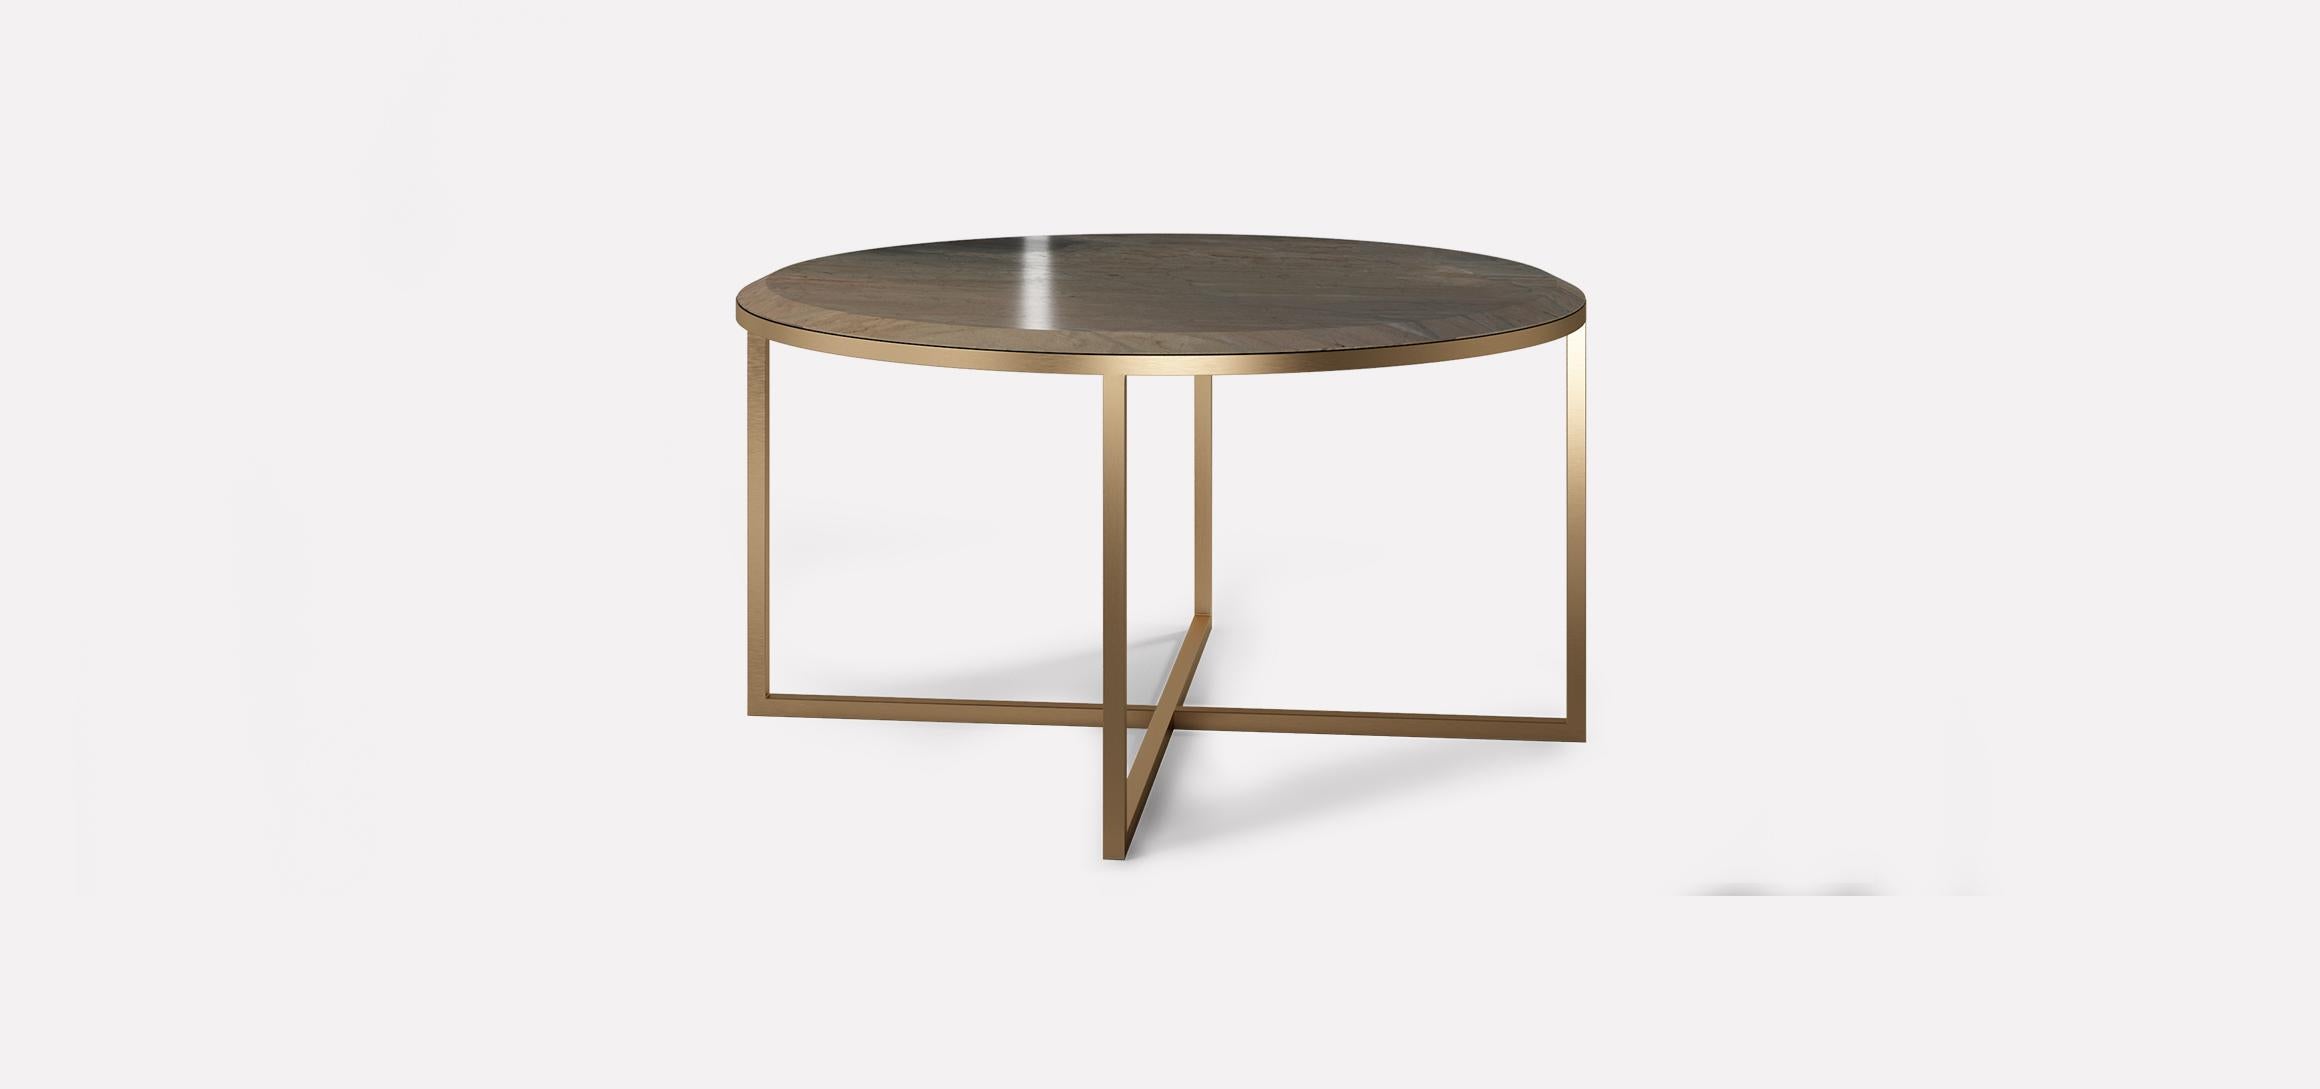 HOPE Royal is a coffee table with a round-shaped top and metal crossed base. The top is a precious marble perfectly beveled and carved, letting the beauty of material being the design protagonist of this piece.

As shown marble: elegant brown